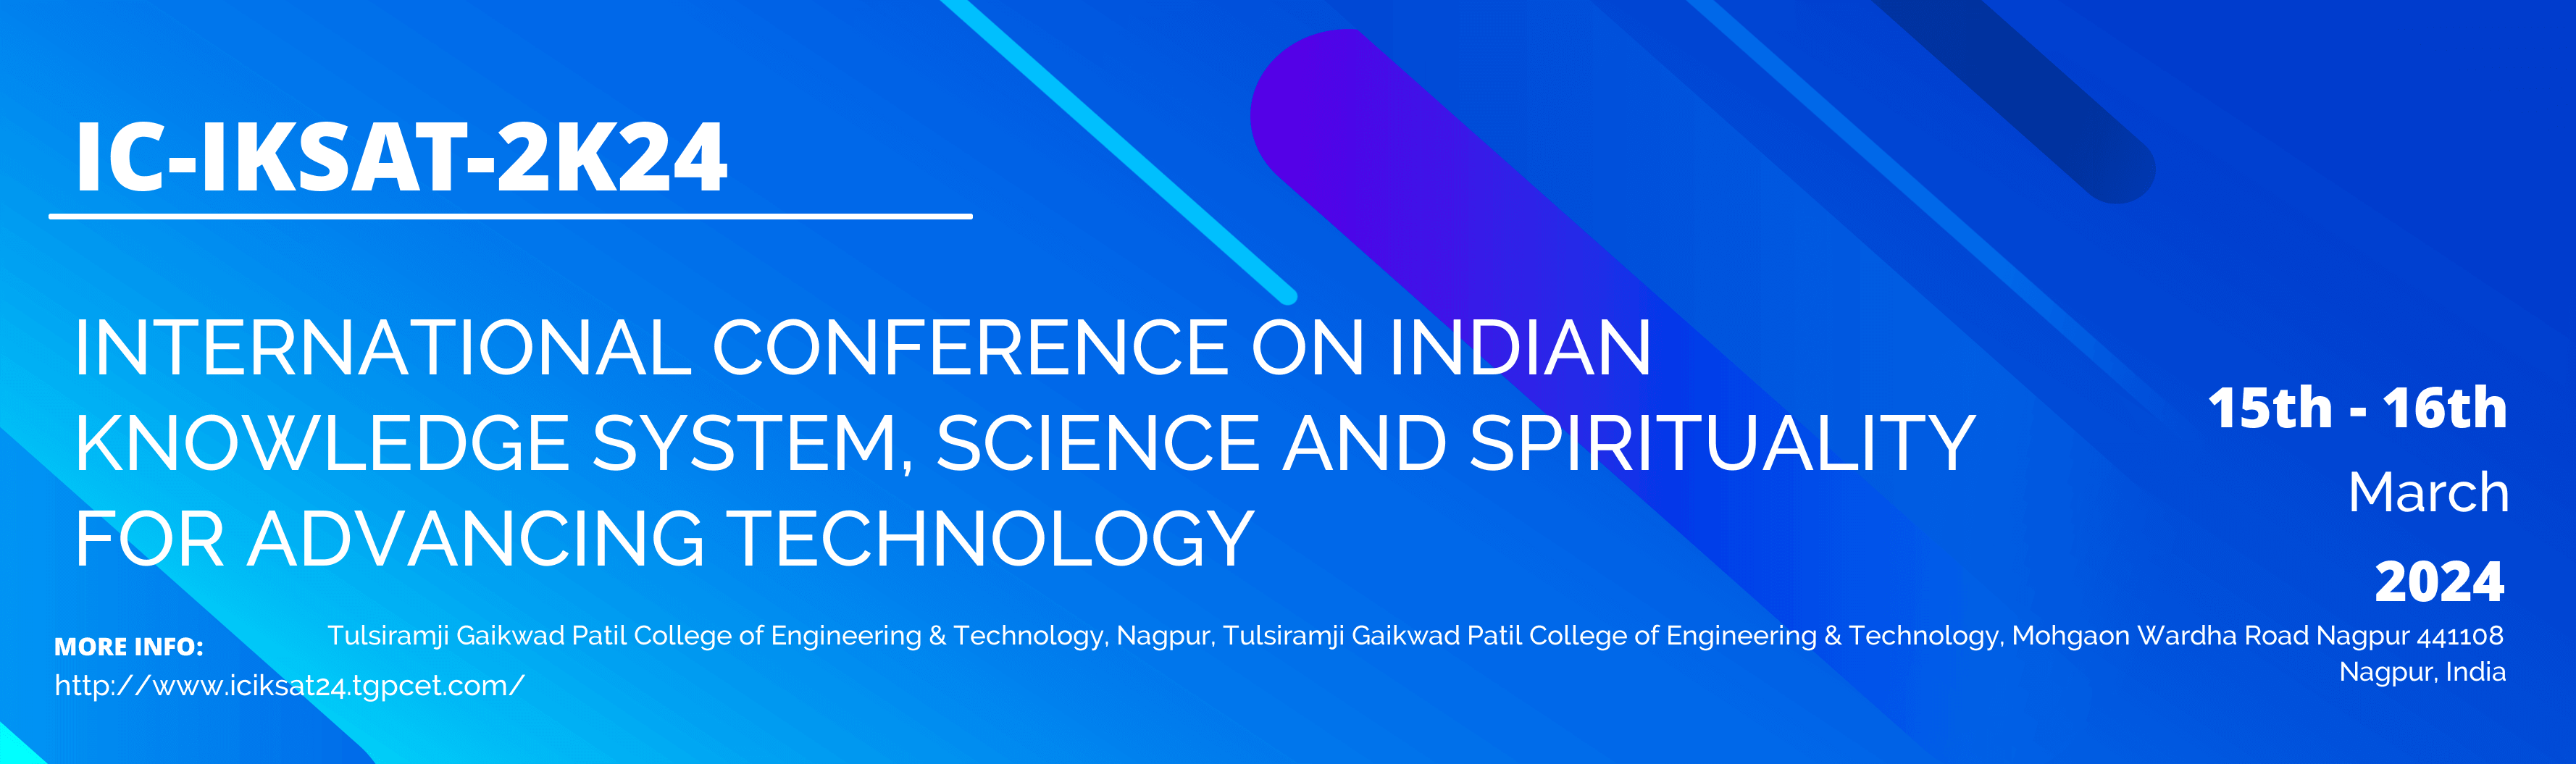 IC-IKSAT-2K24 International Conference on Indian Knowledge System, Science and Spirituality for Advancing Technology